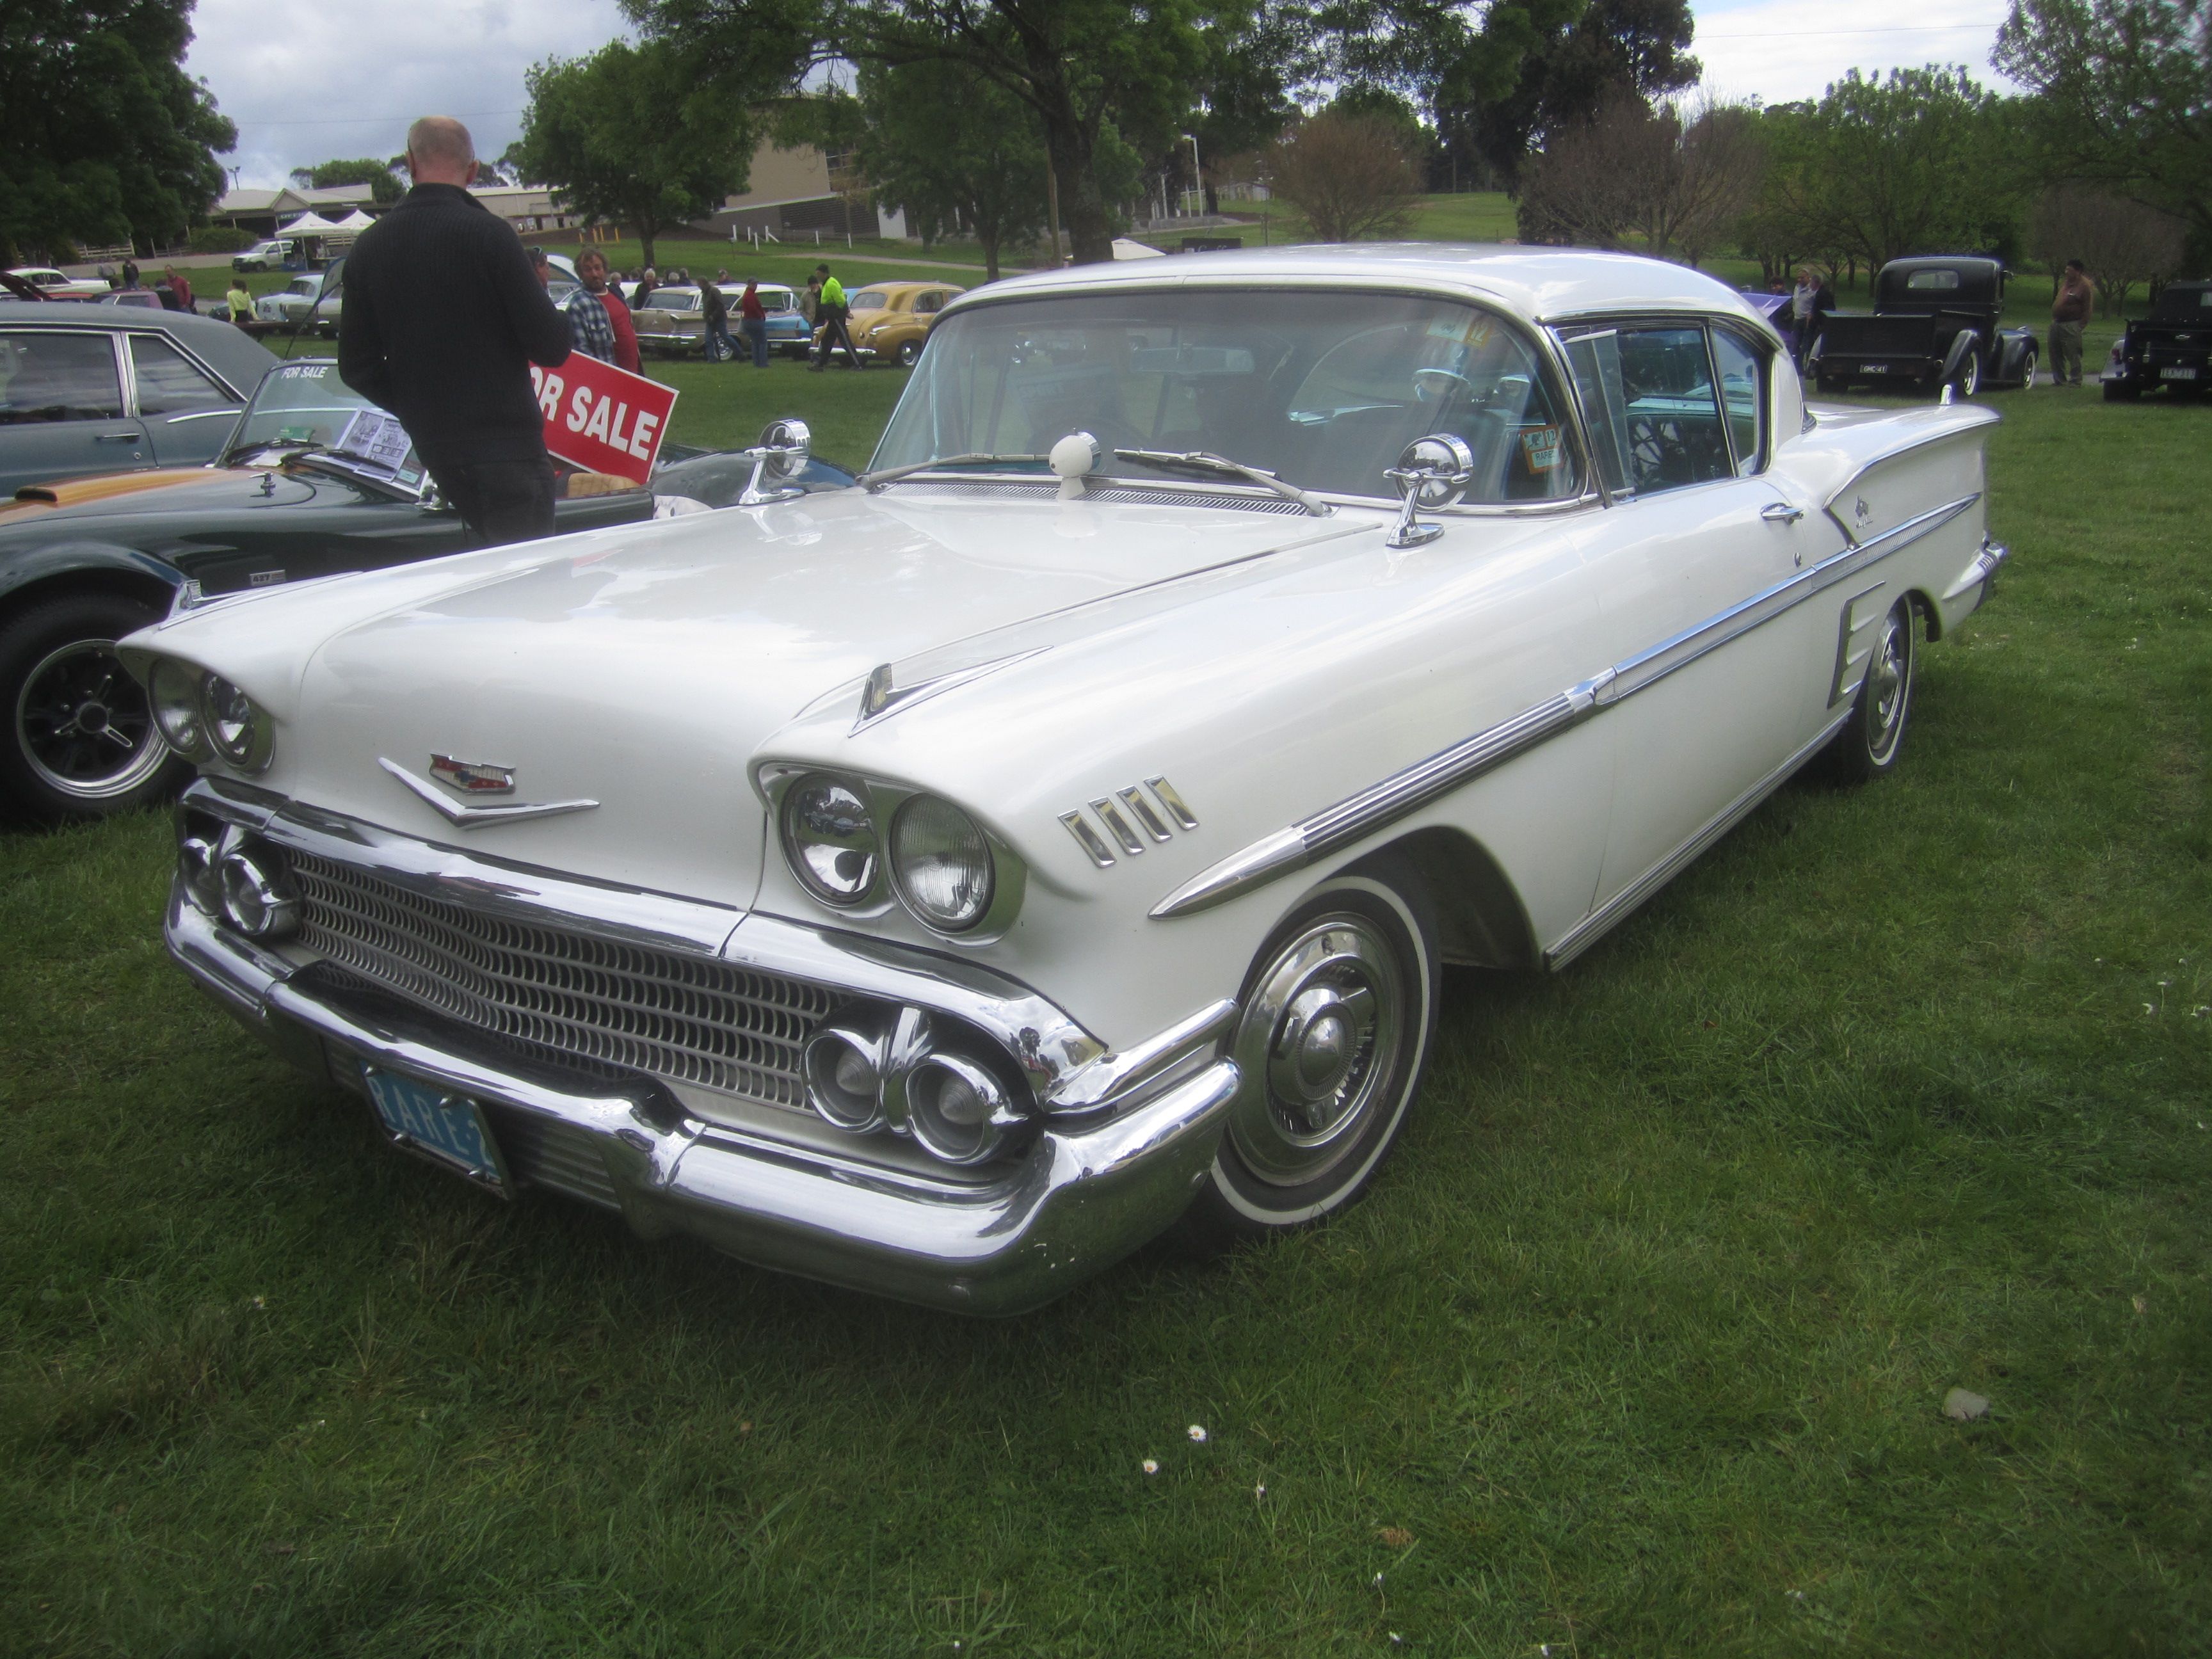 A parked 1958 Chevy Impala